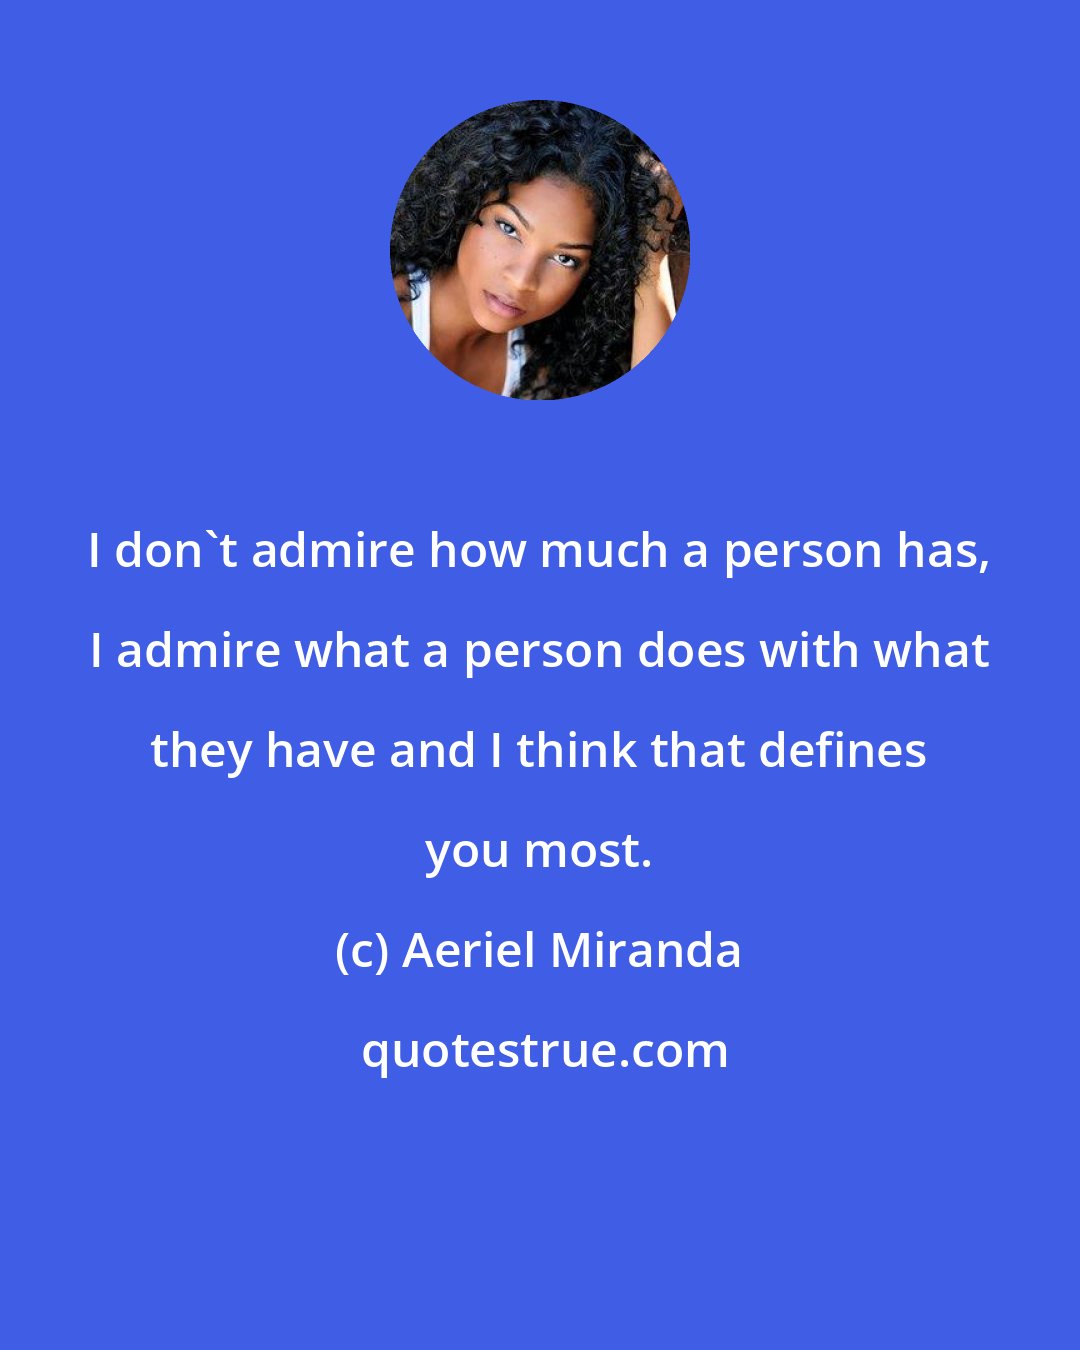 Aeriel Miranda: I don't admire how much a person has, I admire what a person does with what they have and I think that defines you most.